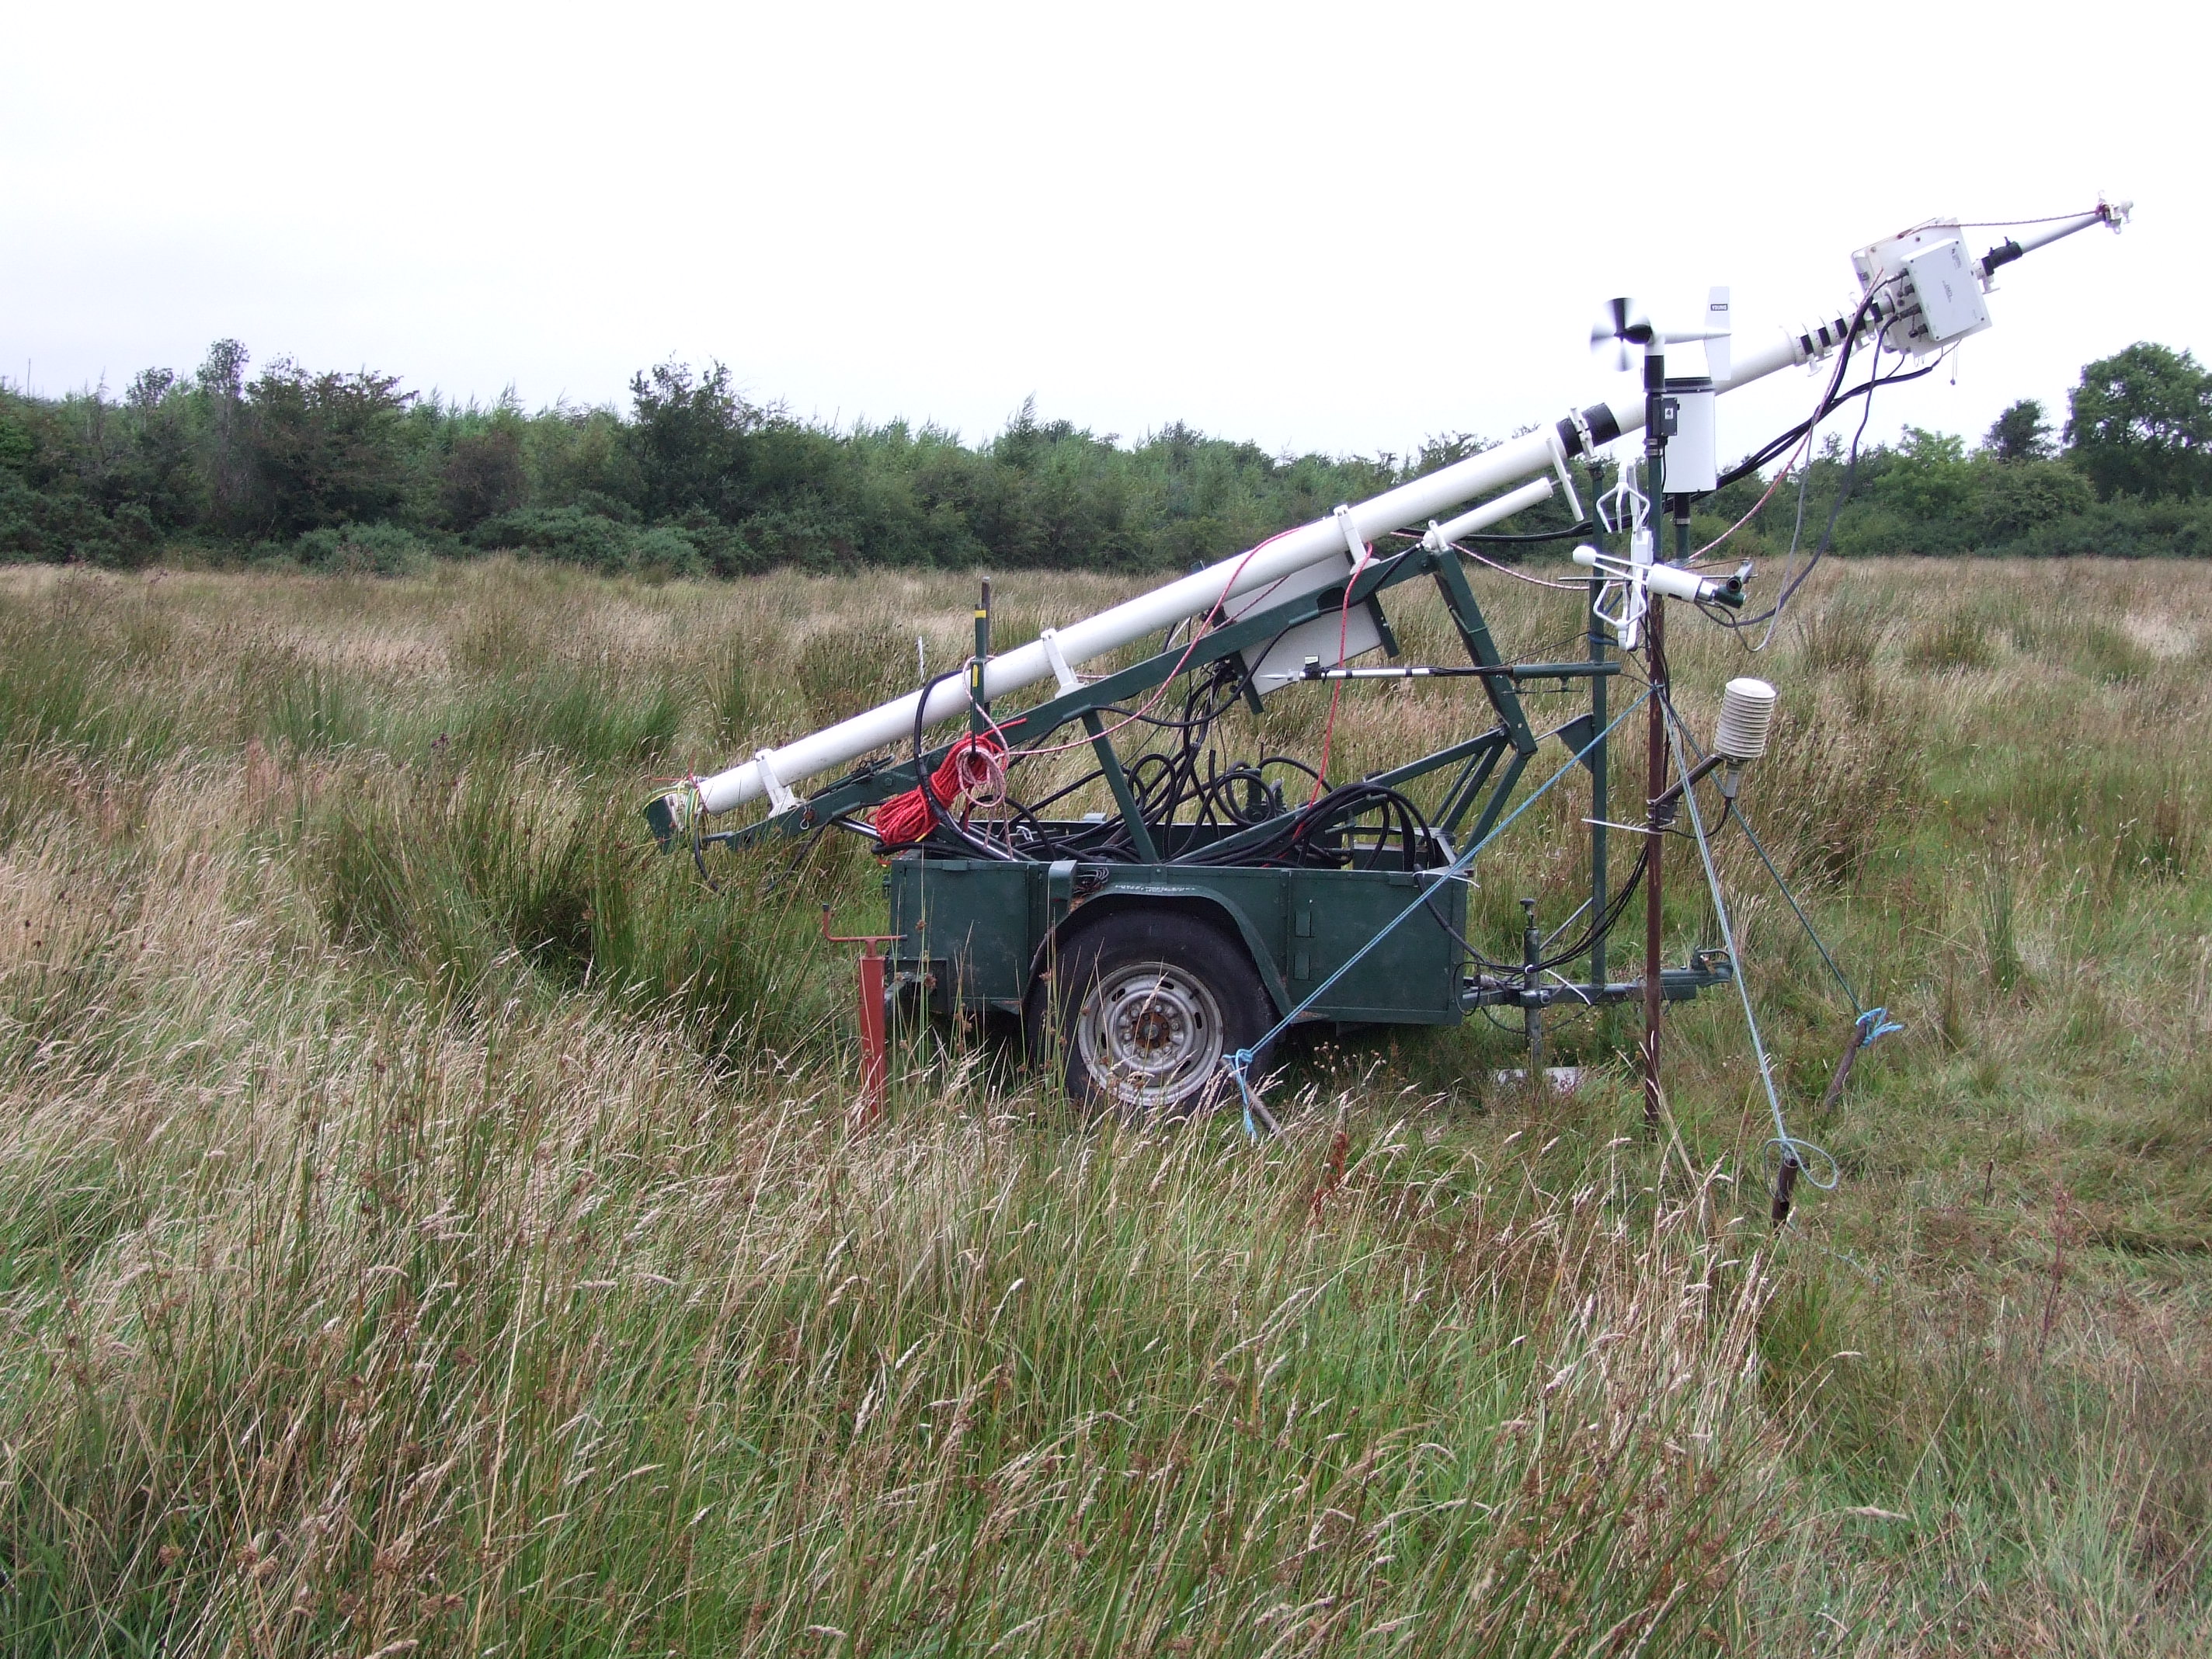 The mobile mast was designed so that the sensors head can be deployed on a separate small mast when the upright height of the mobile unit (4m) is too tall for a given crop height e.g. grassland crop height = 60 to 80cm)